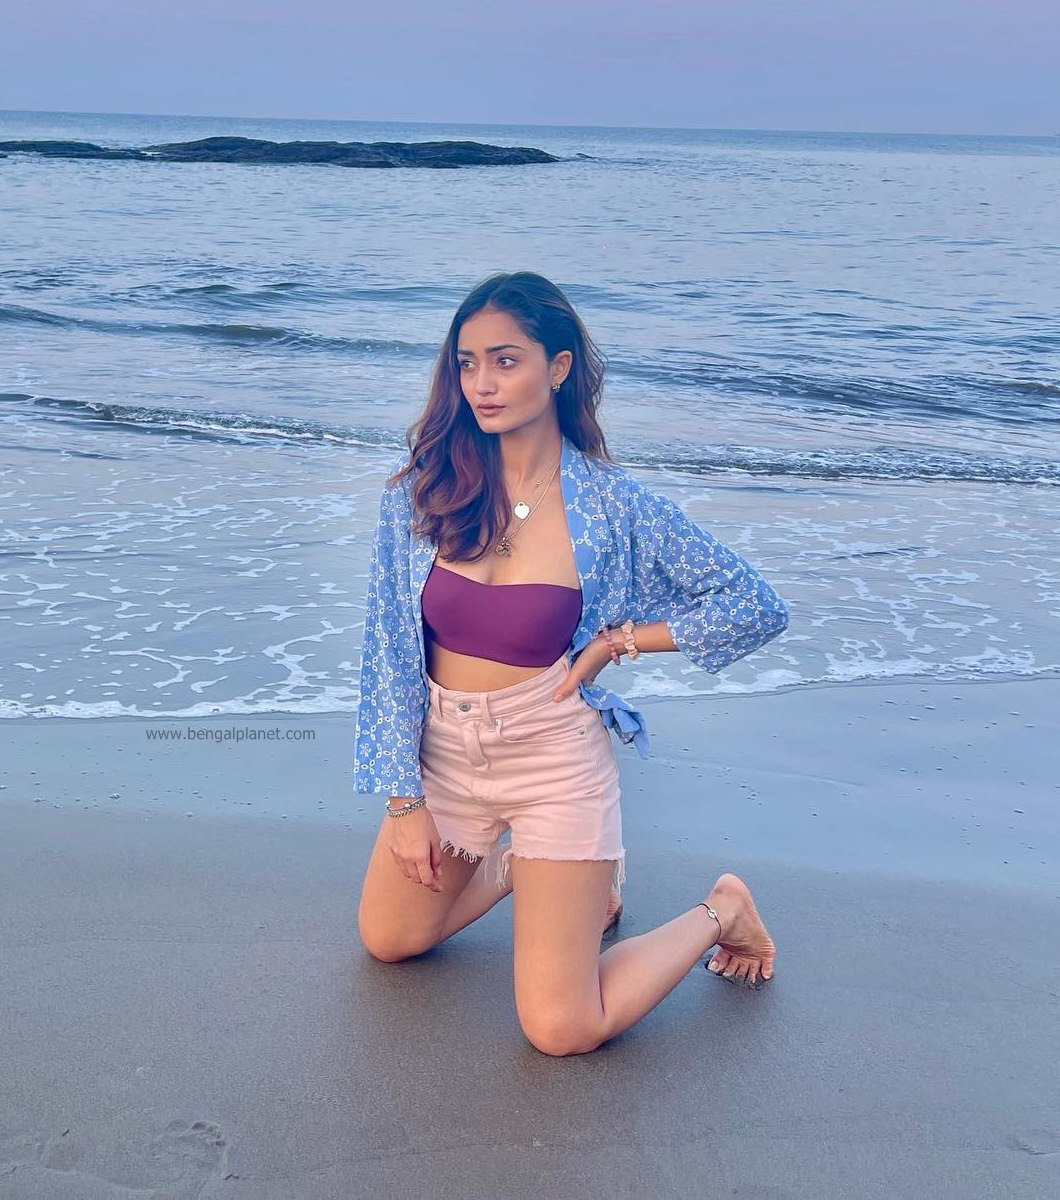 Tridha-Choudhury-looks-chic-hot-and-classy-in-these-pictures-41-Bengalplanet.com